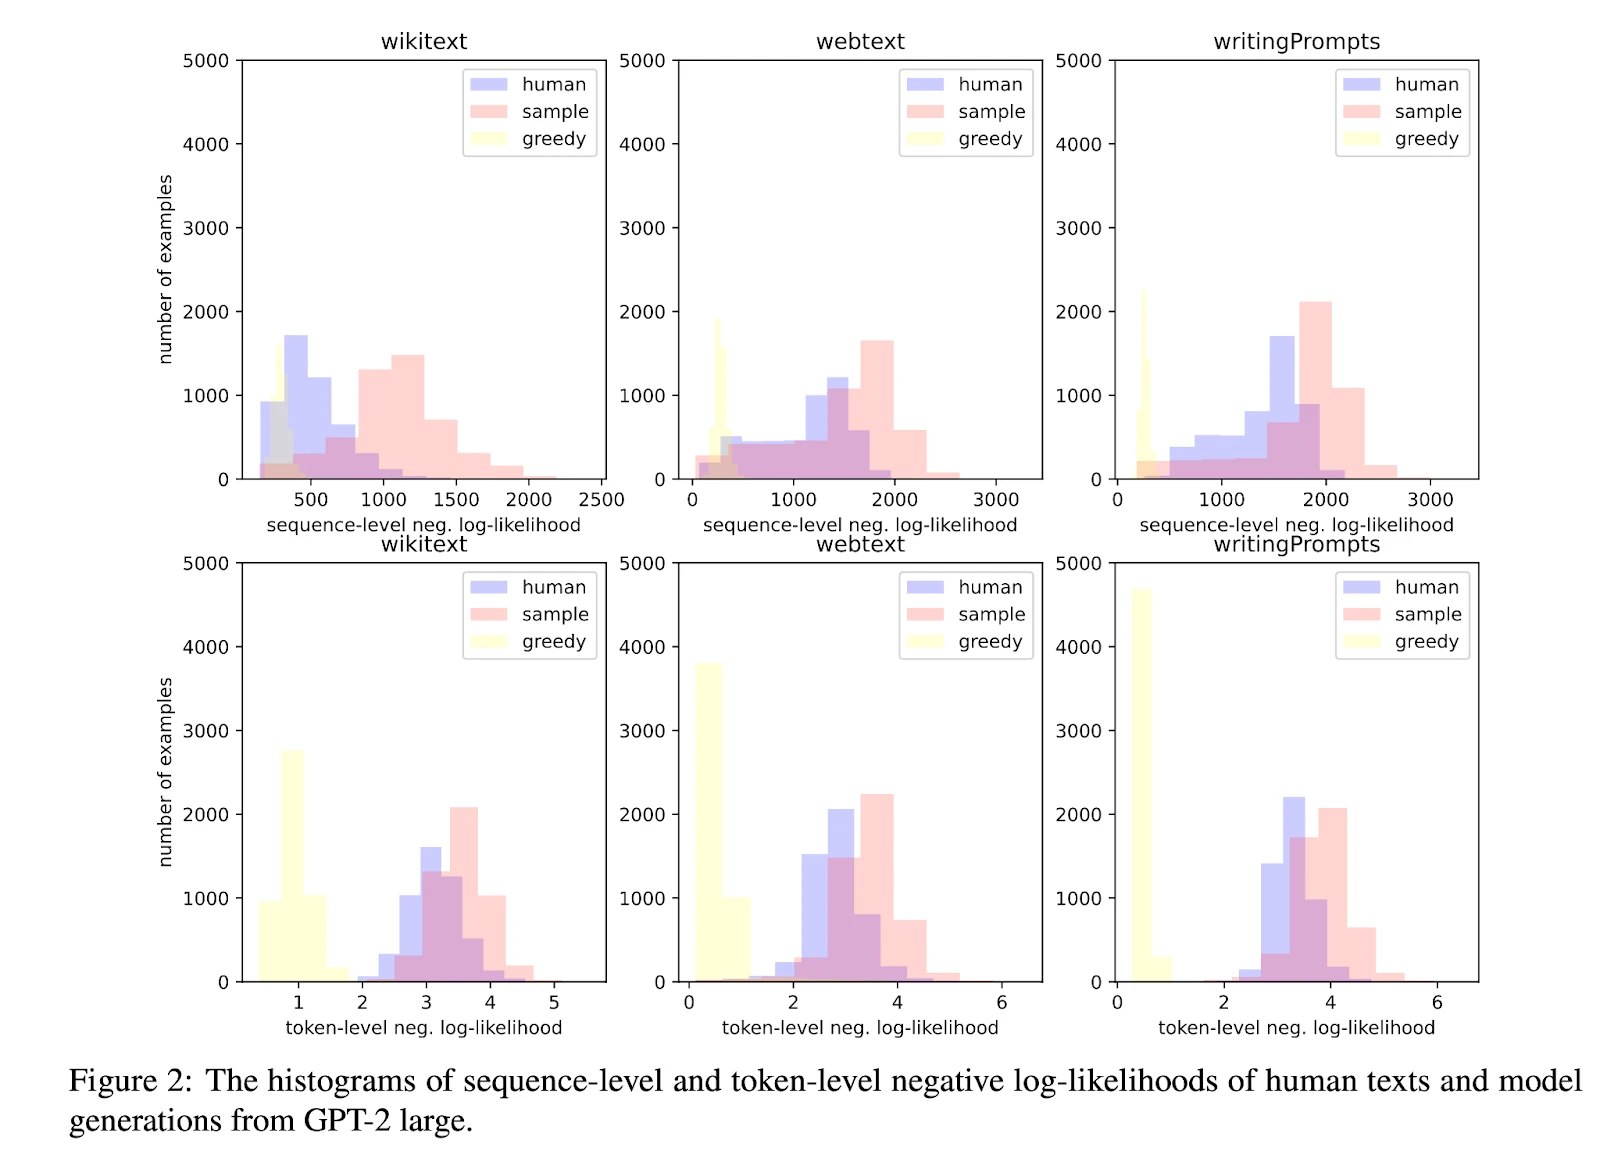 Figure 2: The histograms of sequence-level and token-level negative log-likelihoods of human texts and model generations from GPT-2 large.